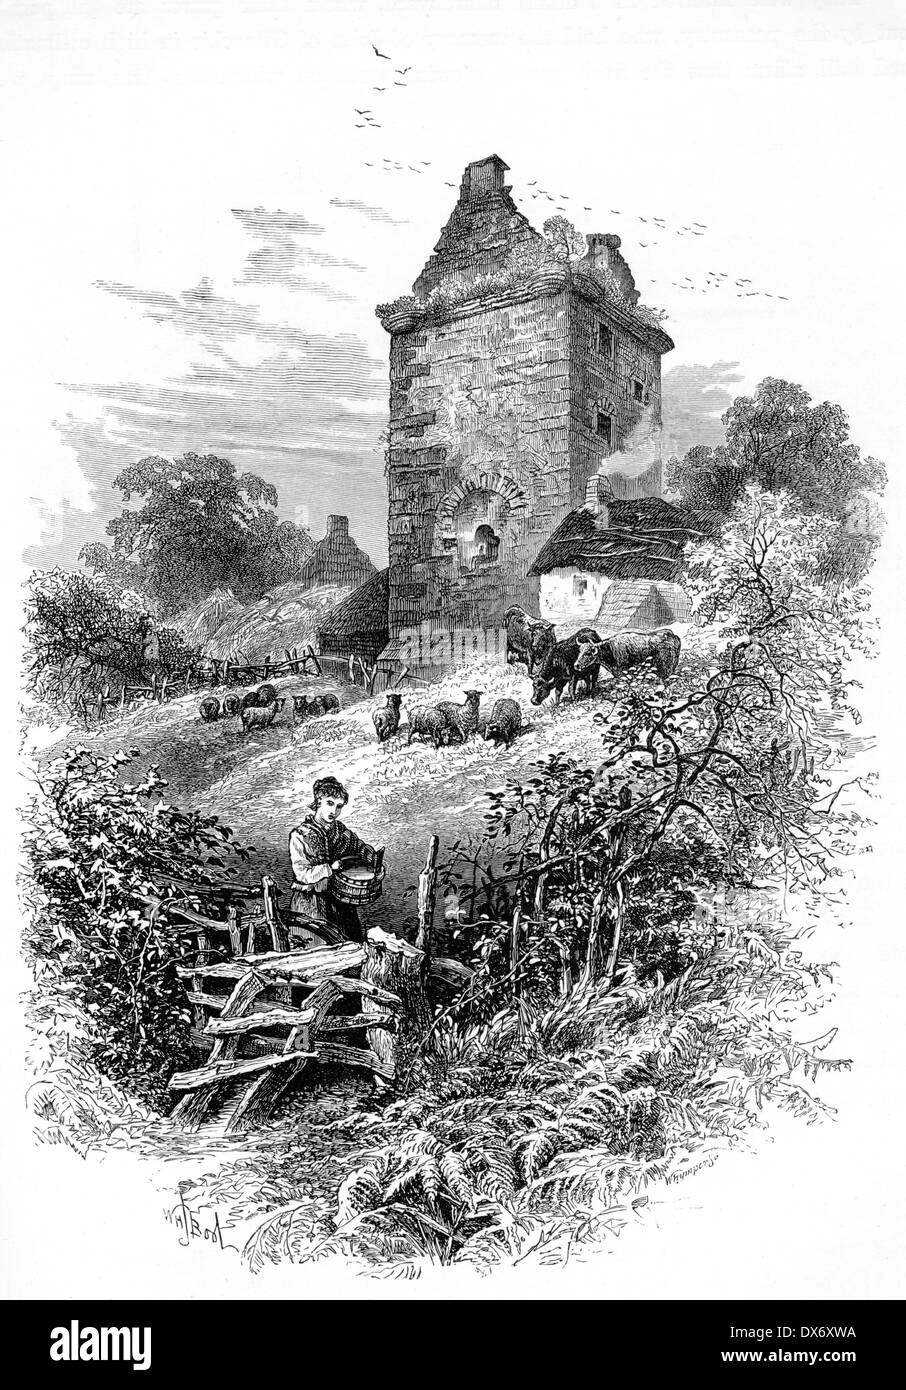 An engraving entitled 'Johnny Armstrong's Tower' scanned at high resolution from a book published in 1880. Gilnockie Tower house Stock Photo